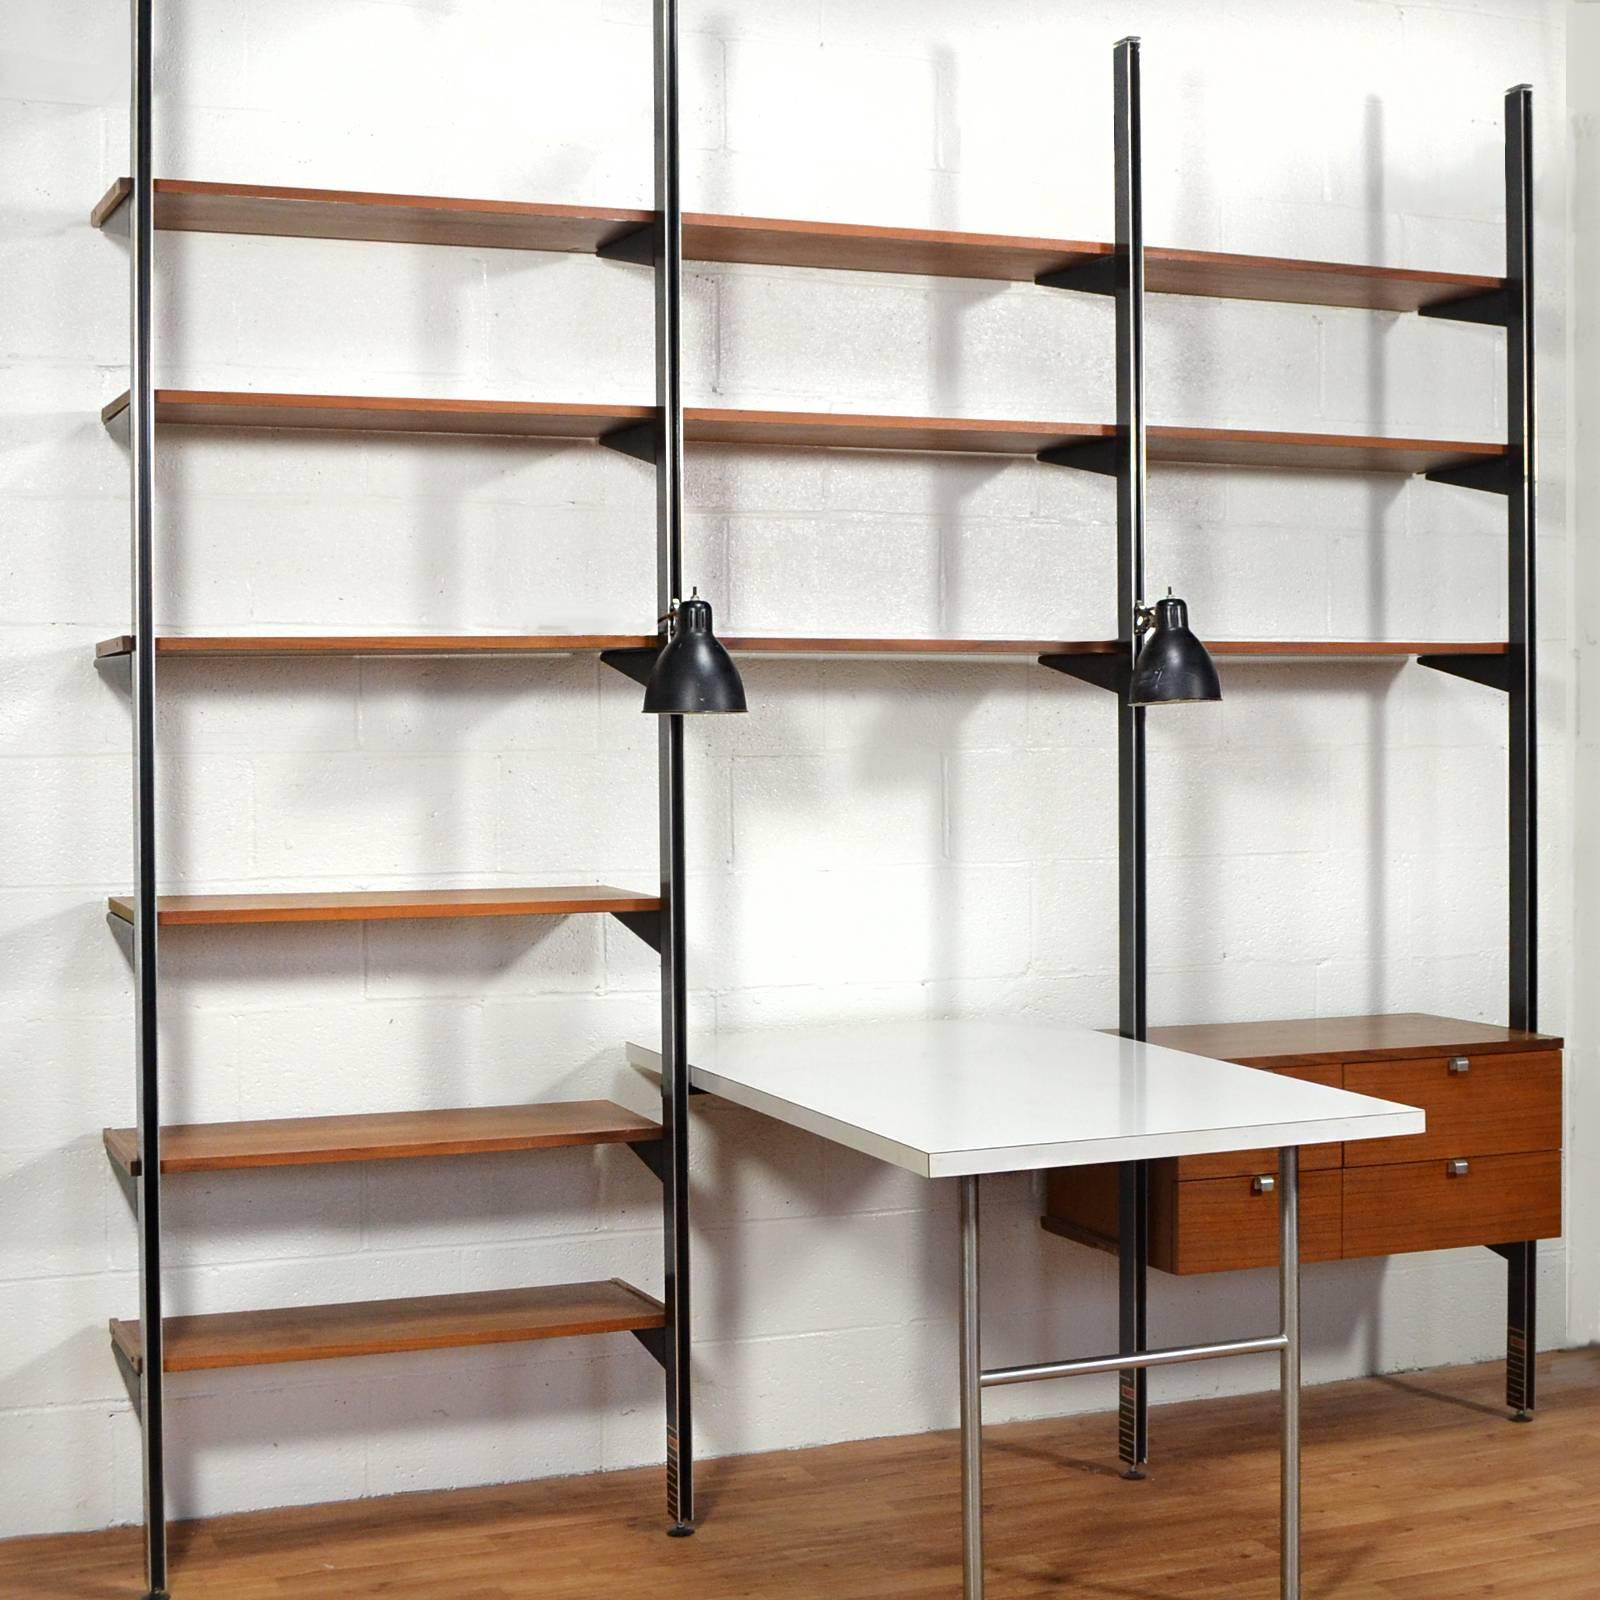 This CSS shelving unit is most uncommon. It is the very first generation produced by Herman Miller and features interesting construction details which differ from the typical production and show the direct relationship to it's precursor, the 